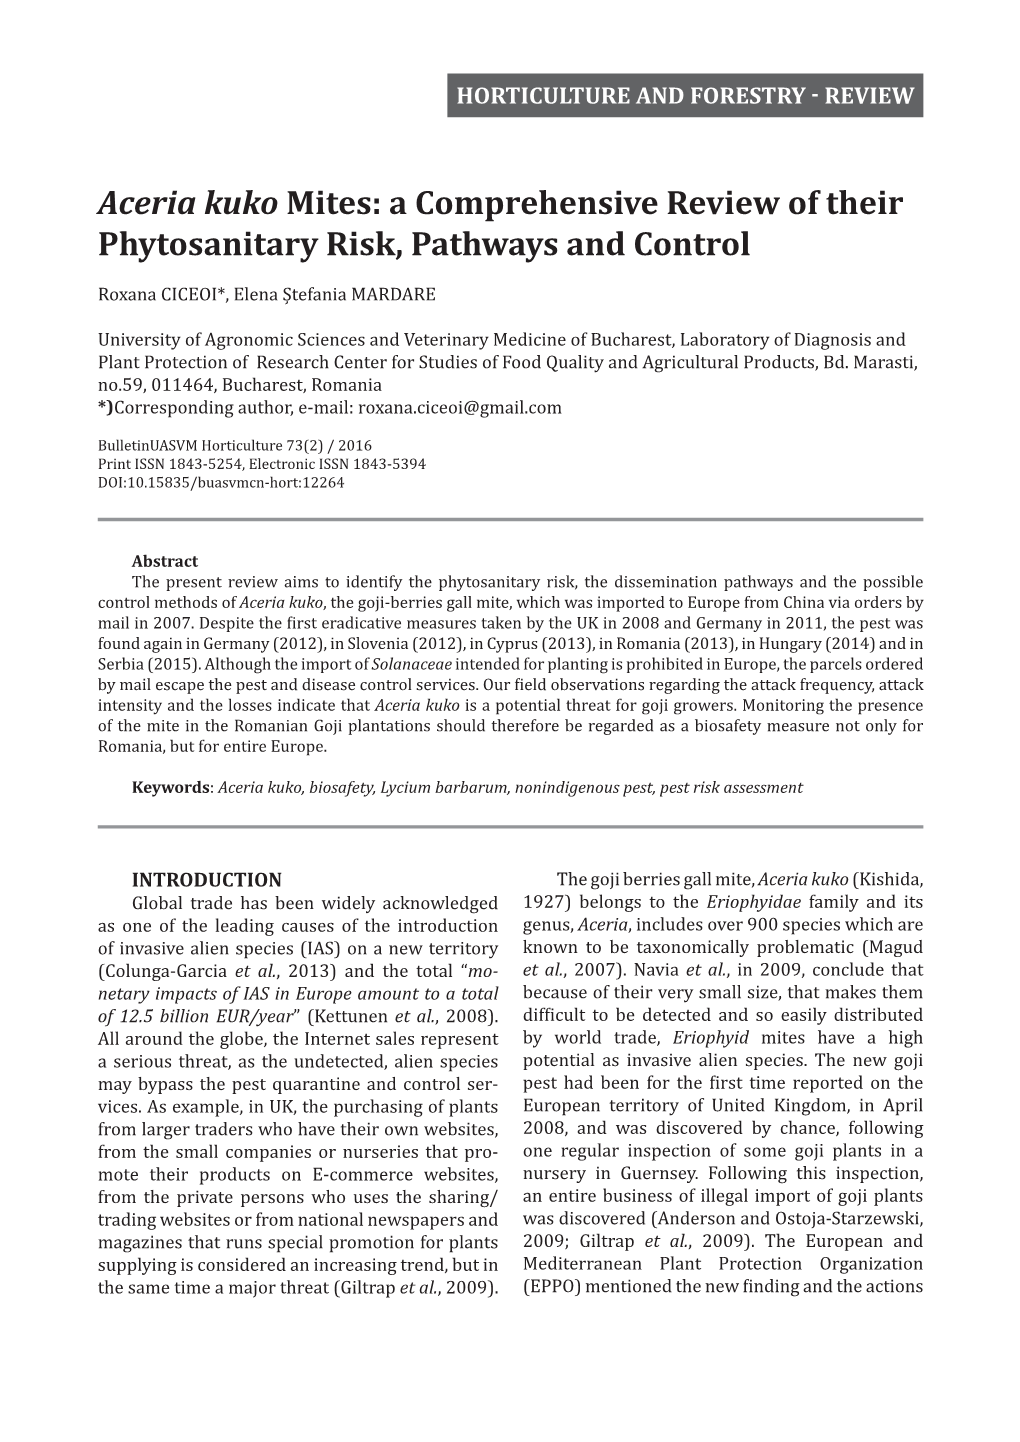 Aceria Kuko Mites: a Comprehensive Review of Their Phytosanitary Risk, Pathways and Control